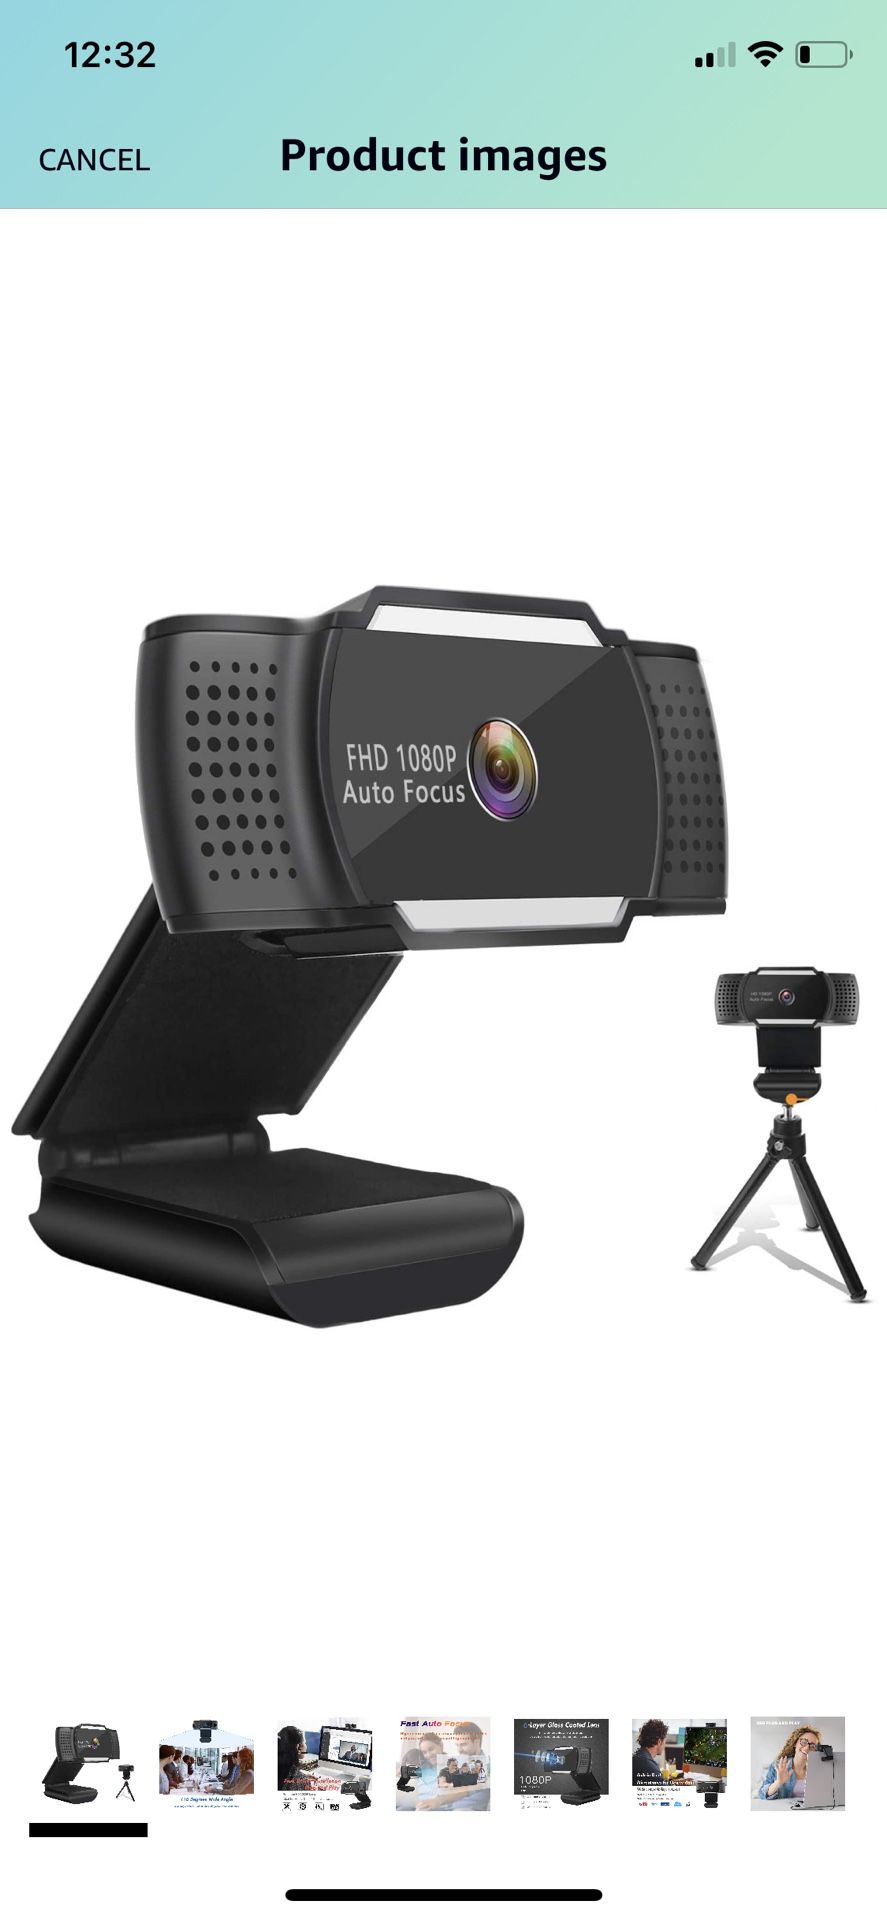 Brand New FHD Webcam 1080P with Microphone, Auto Focus USB Plug and Play 110-degree Wide Angle PC Laptop Desktop Web Camera for Online Teaching Live S